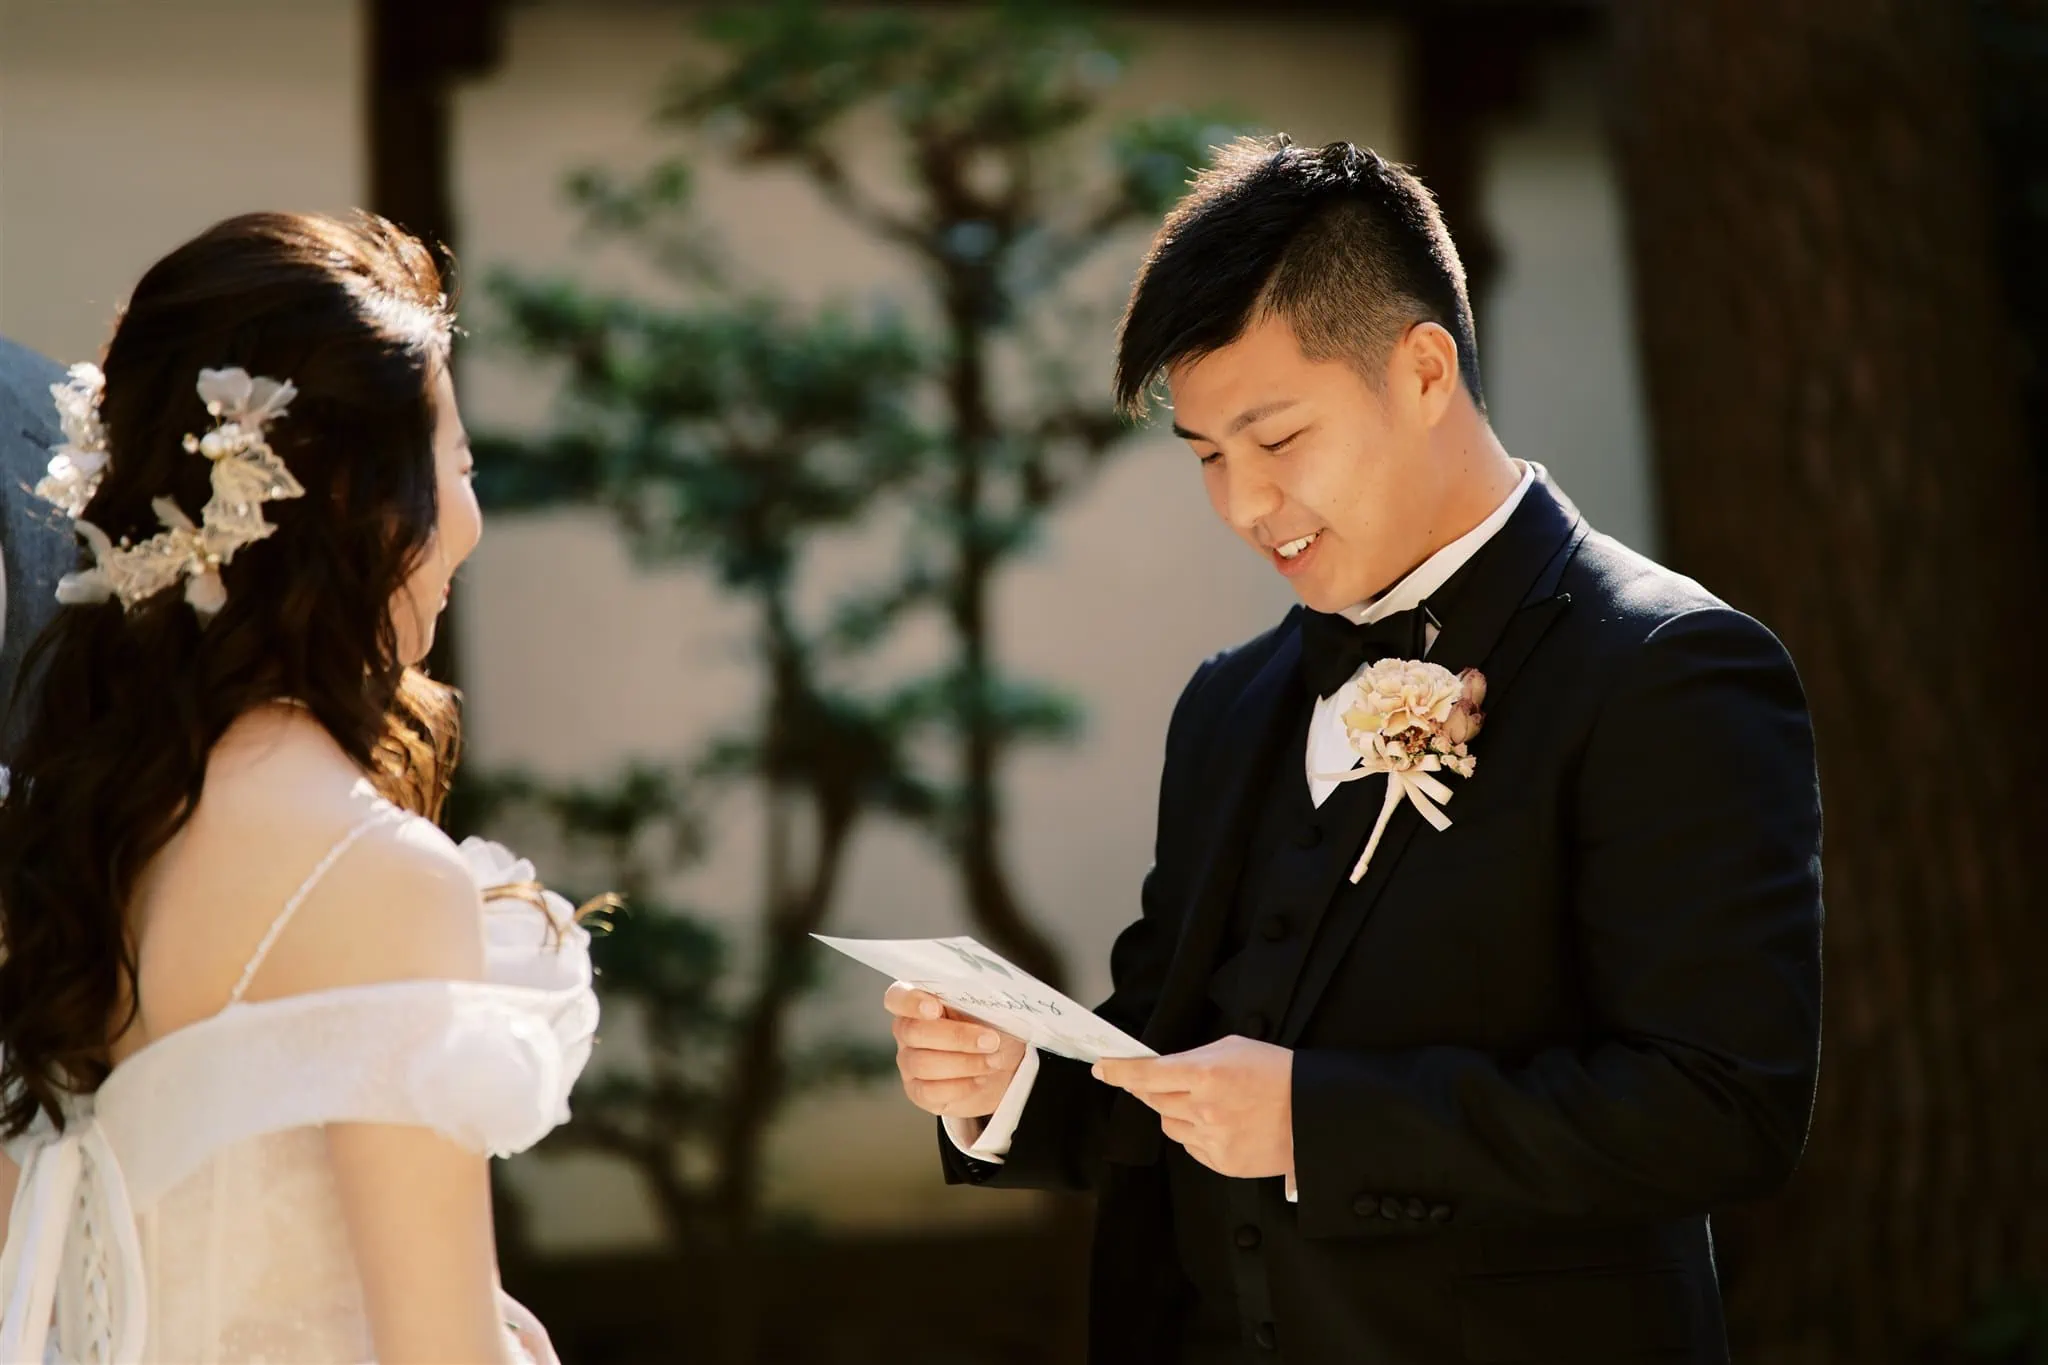 Kyoto Tokyo Japan Elopement Wedding Photographer, Planner & Videographer | A Japanese bride and groom reading their wedding vows captured by an elopement photographer.